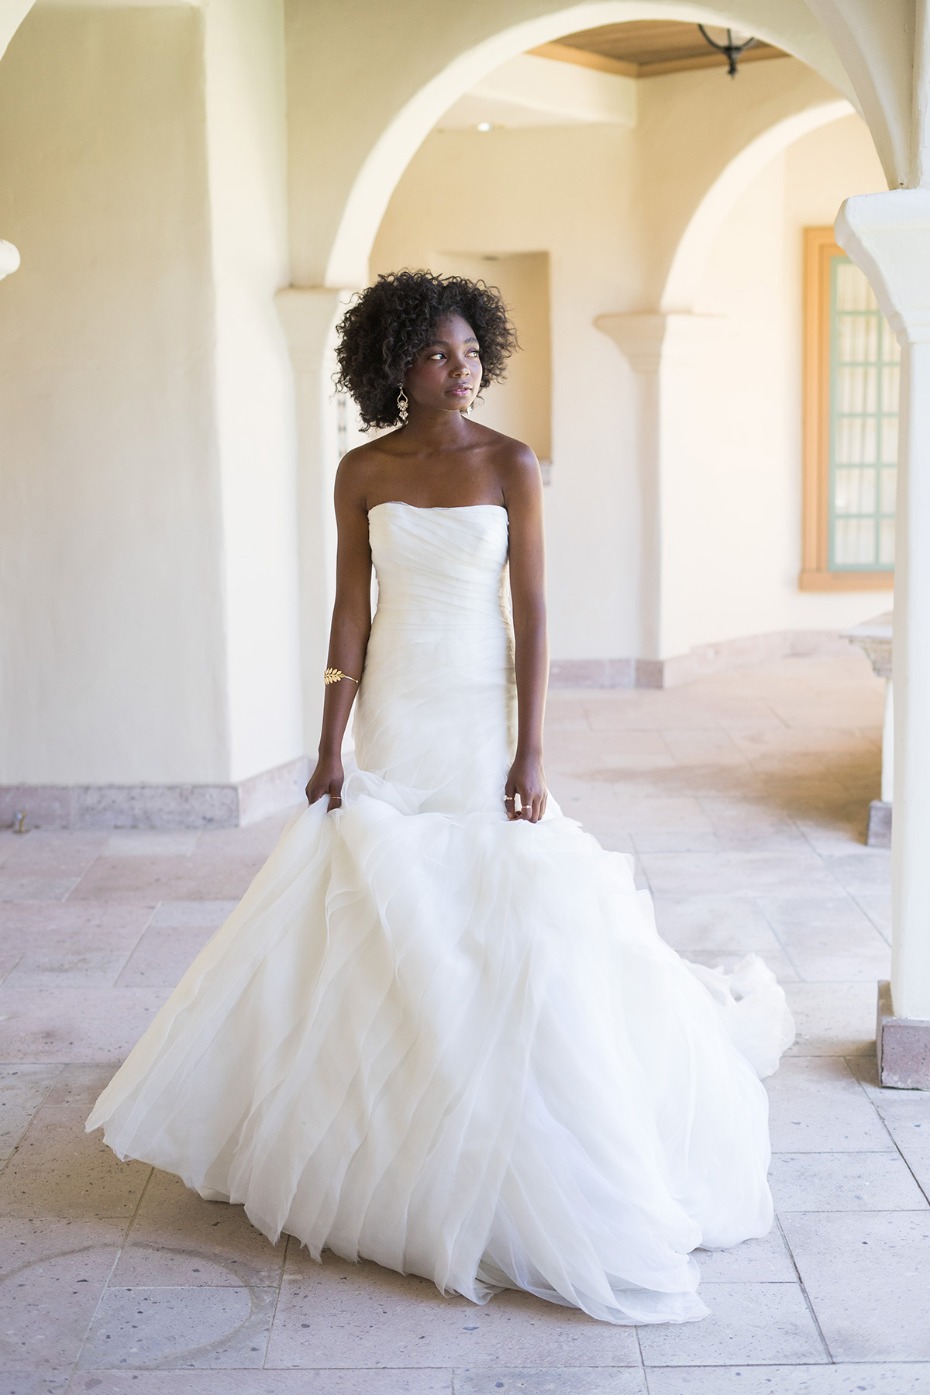 WHITE by Vera Wang Exclusively for Davidâs Bridal Bias-Tier Trumpet Wedding Dress, $1,498